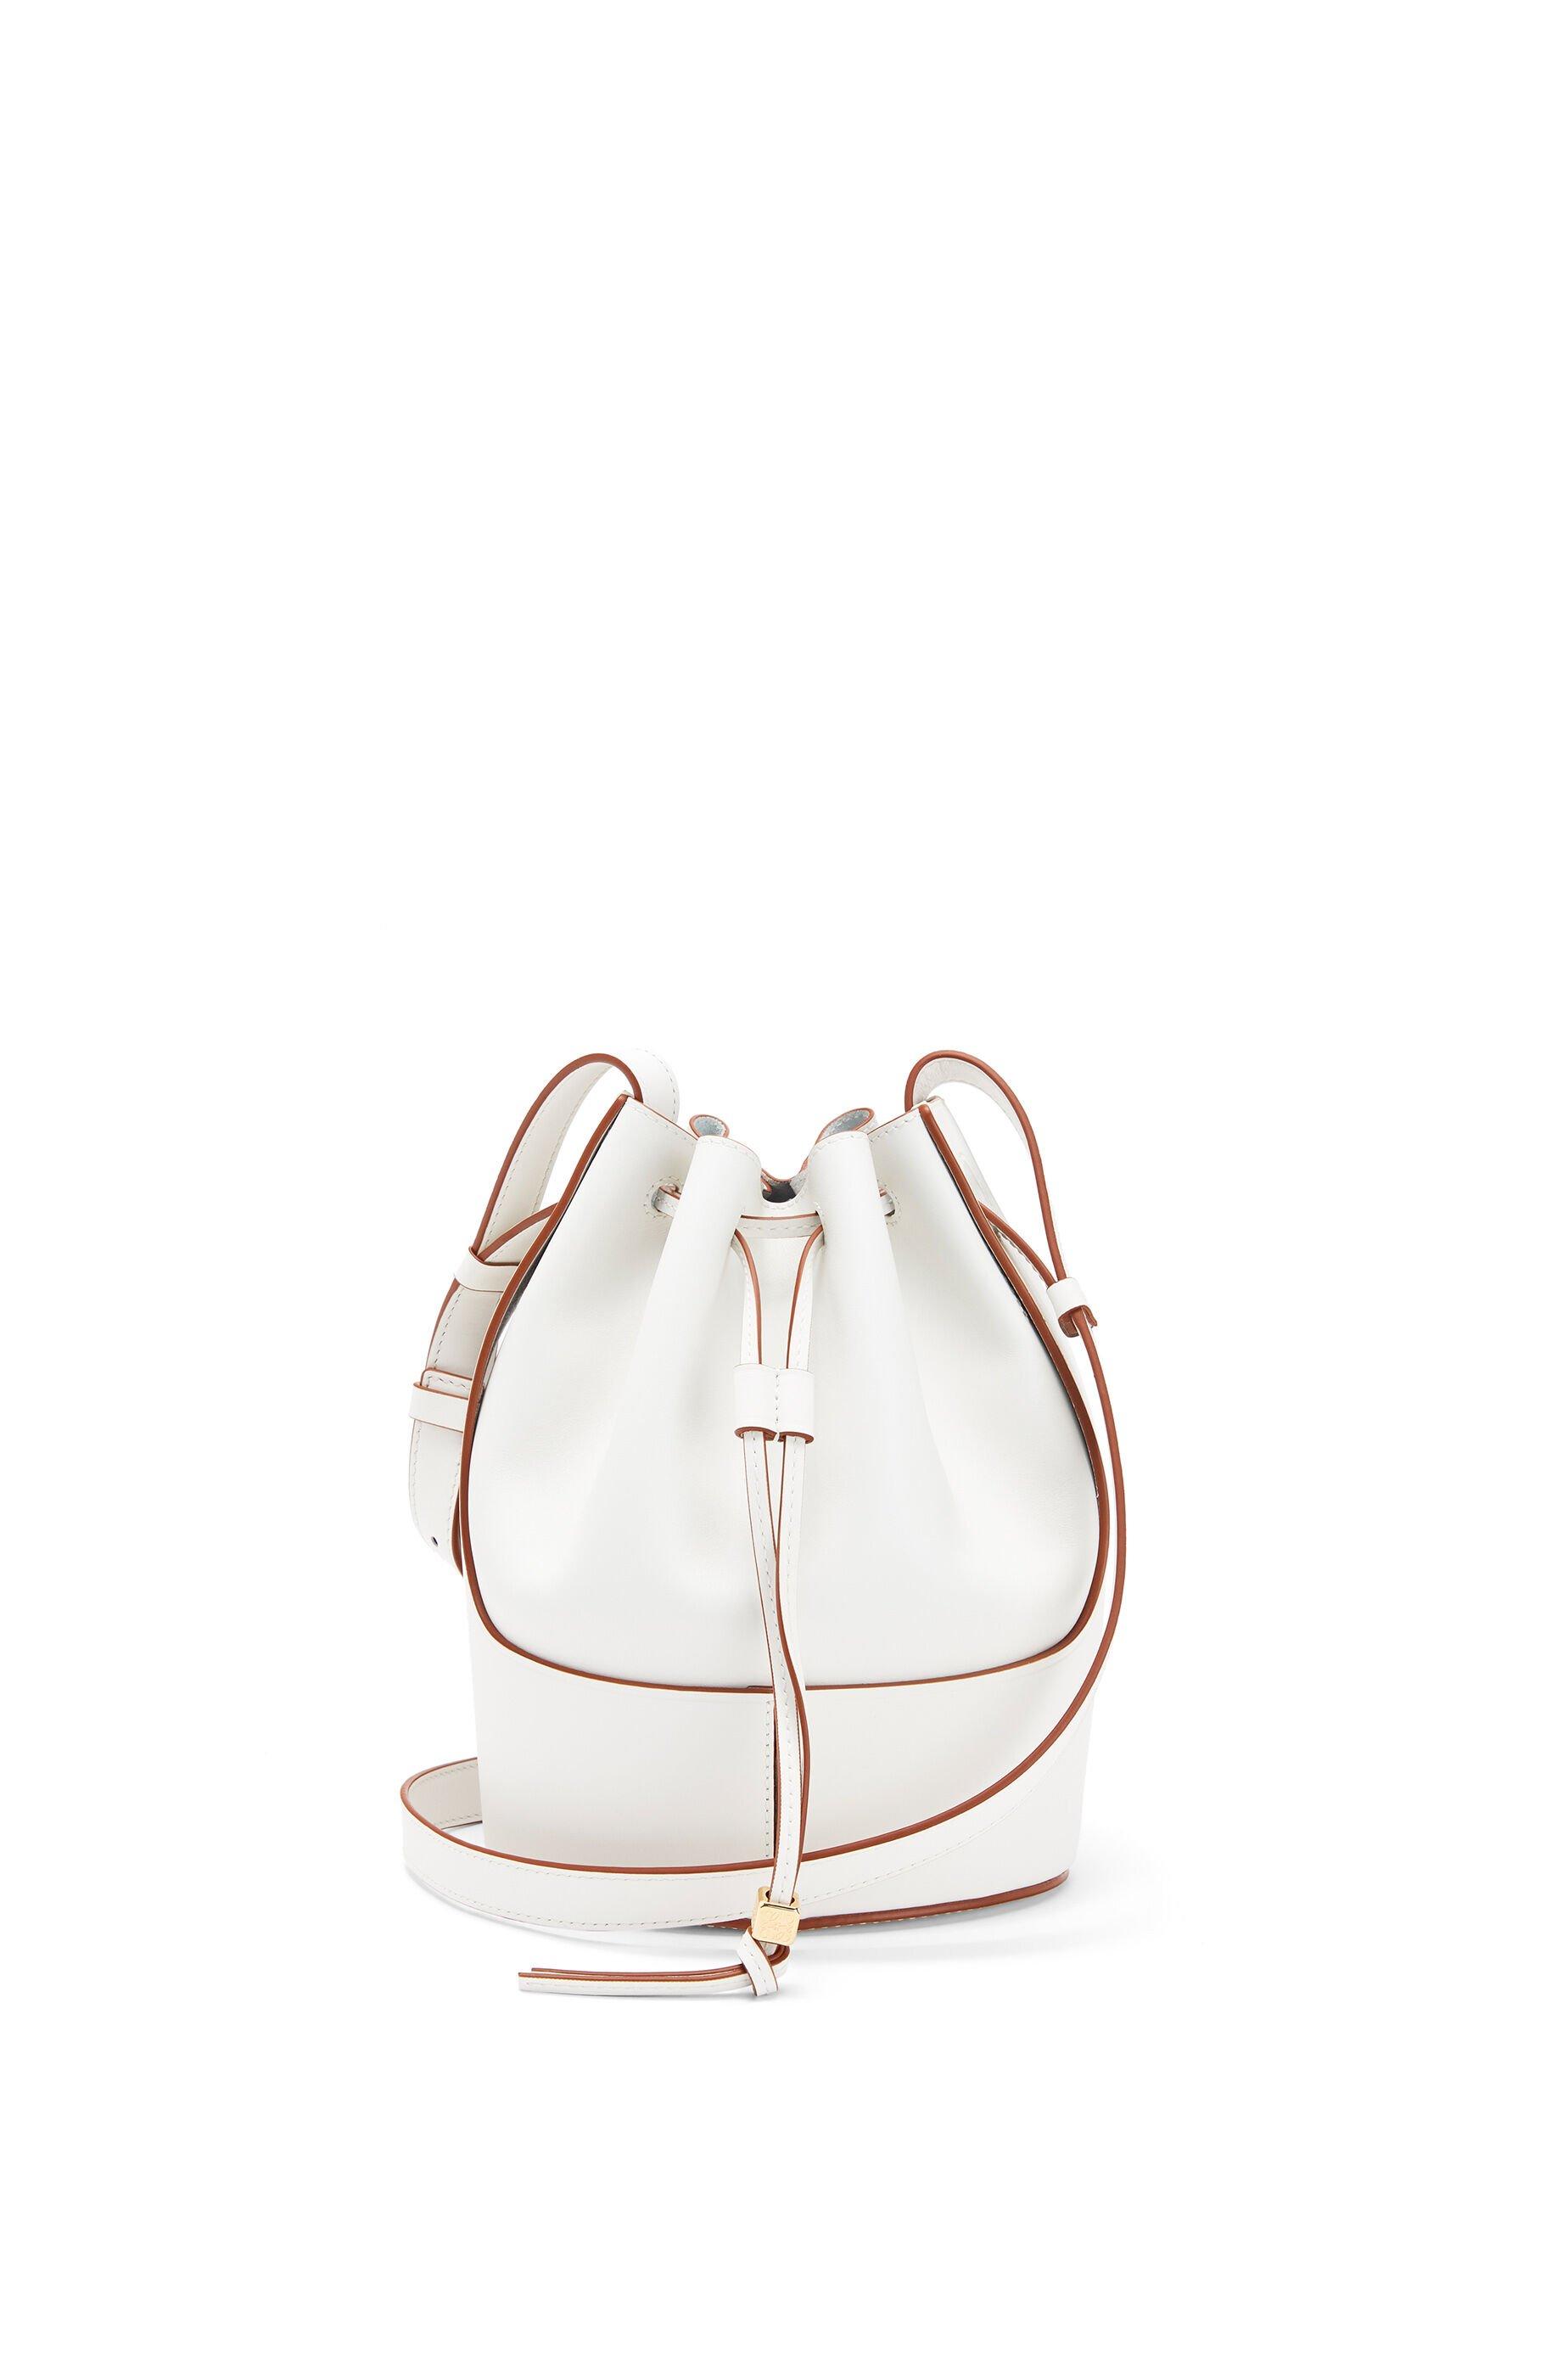 Loewe Balloon Small Leather Shoulder Bag in Soft White (White 